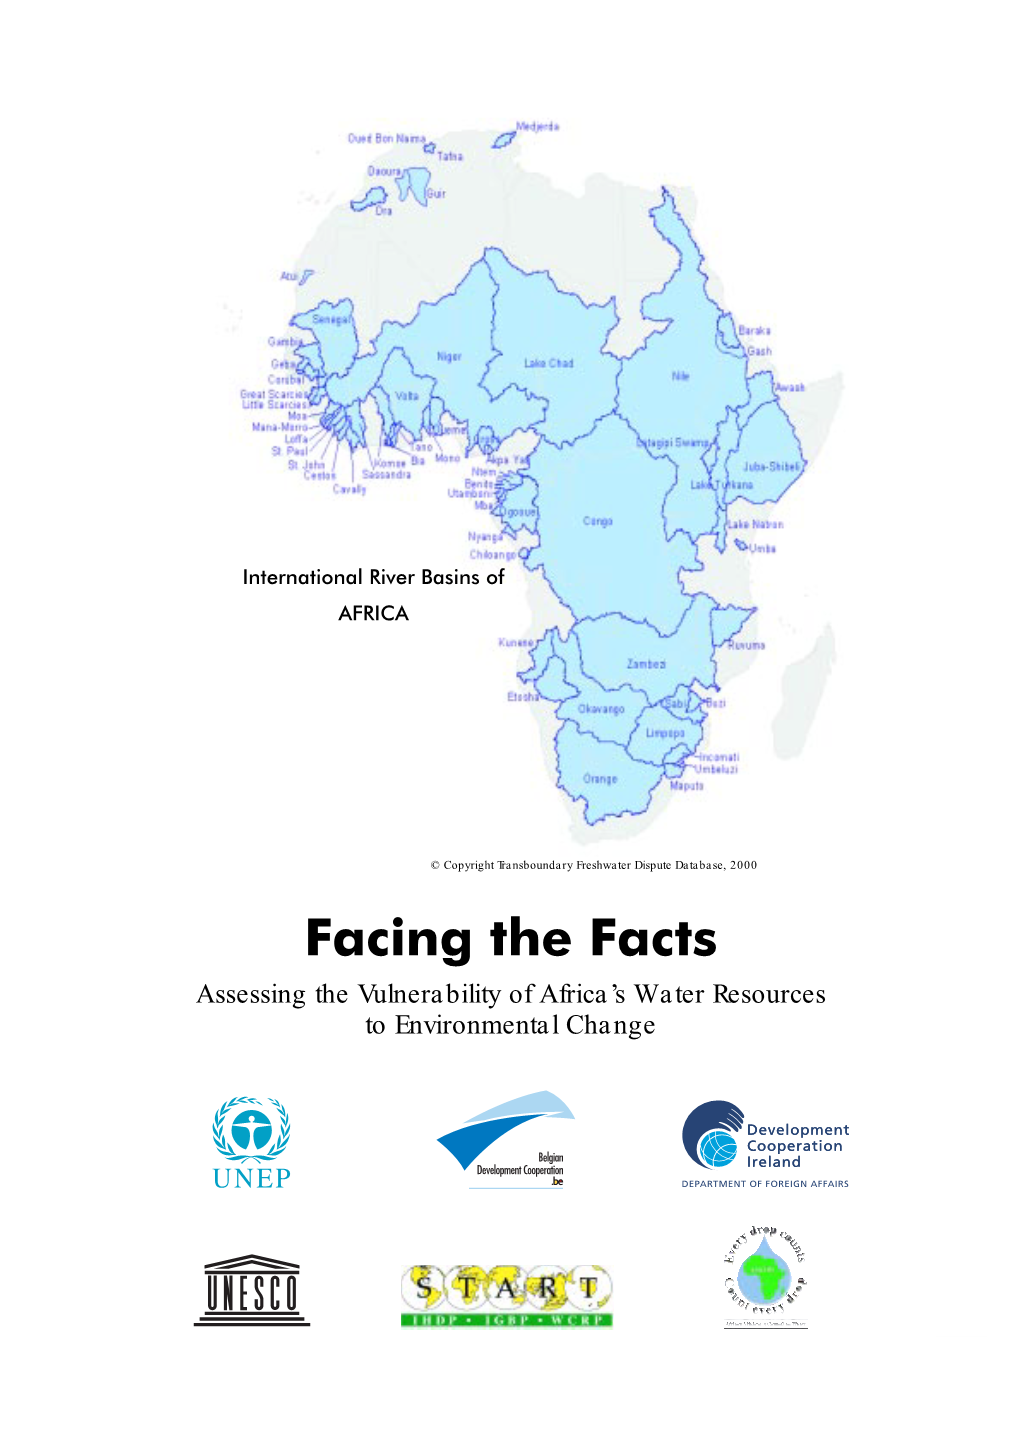 Facing the Facts: Assessing the Vulnerability of Africa's Water